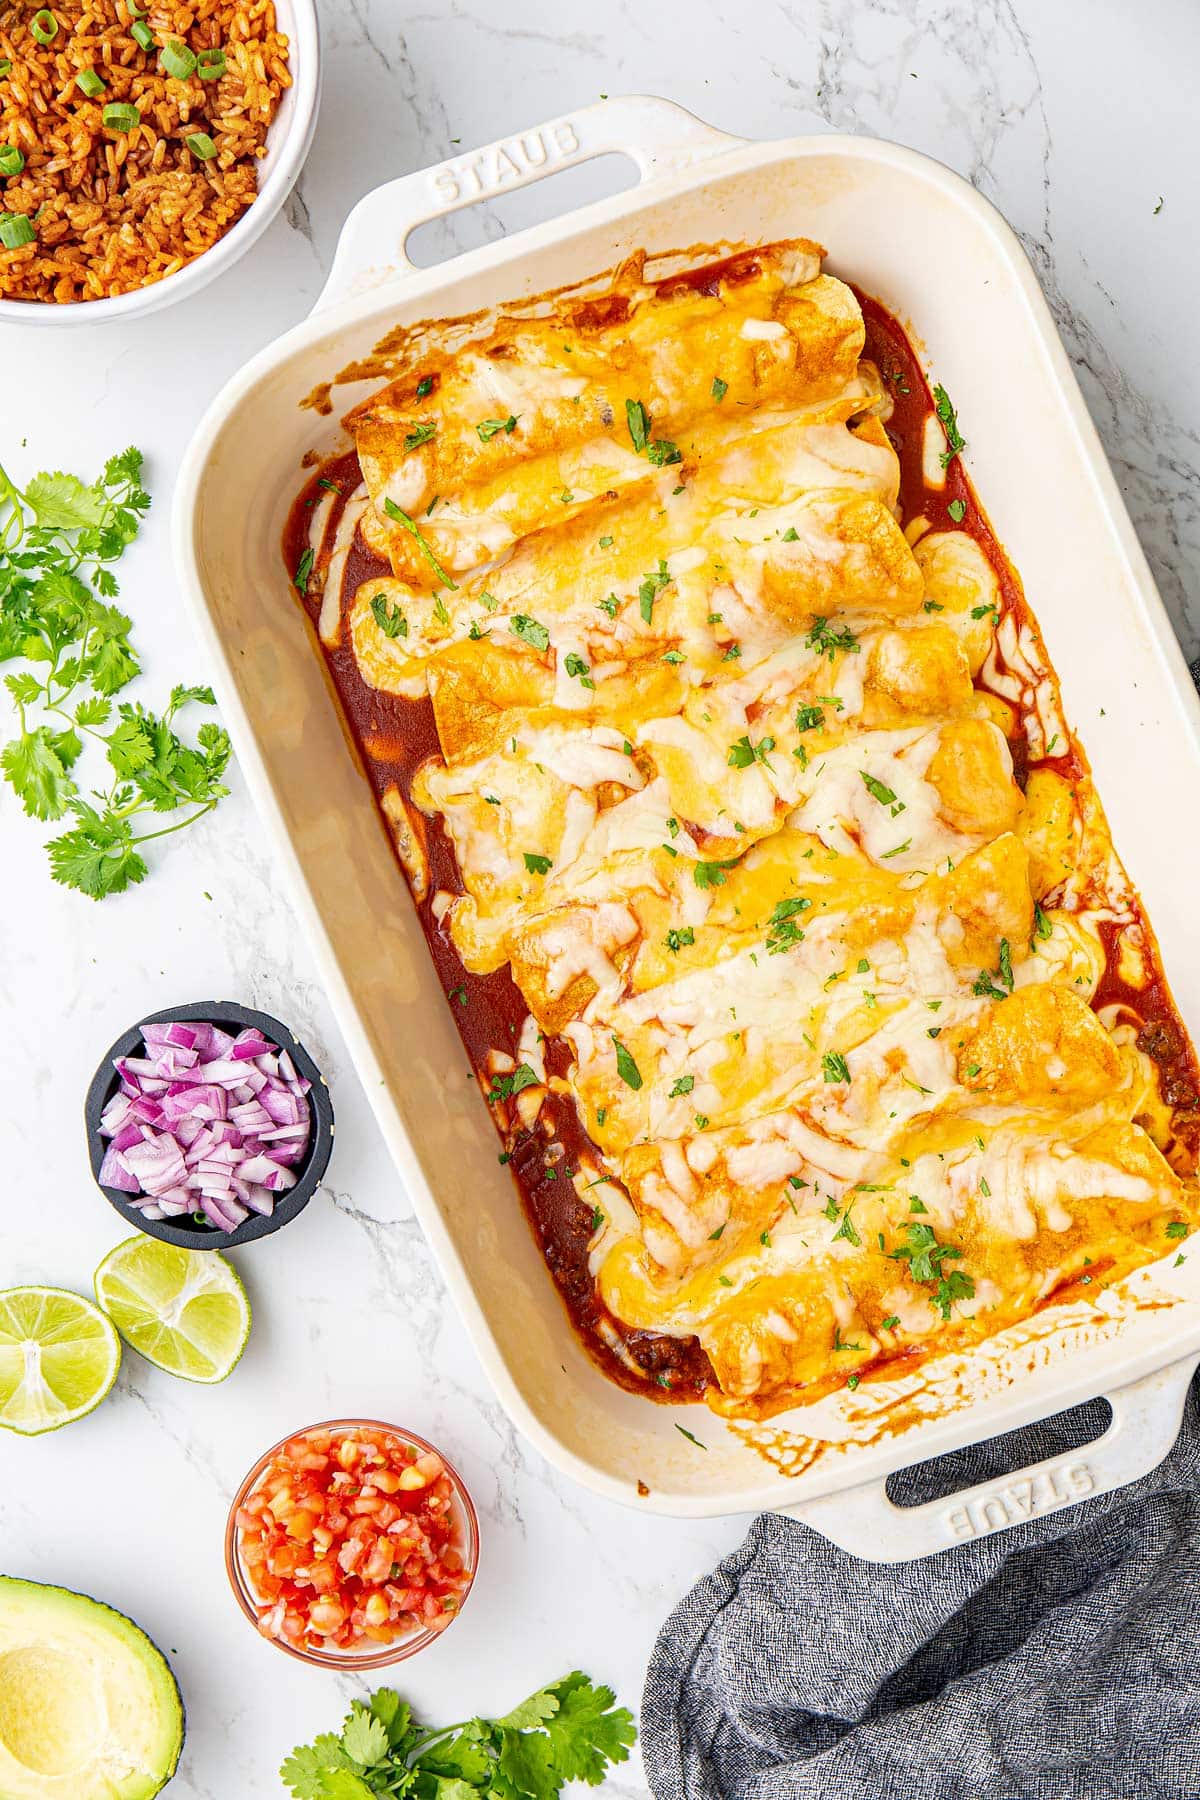 Beef enchiladas topped with enchilada sauce and cheese arranged in a white casserole dish.